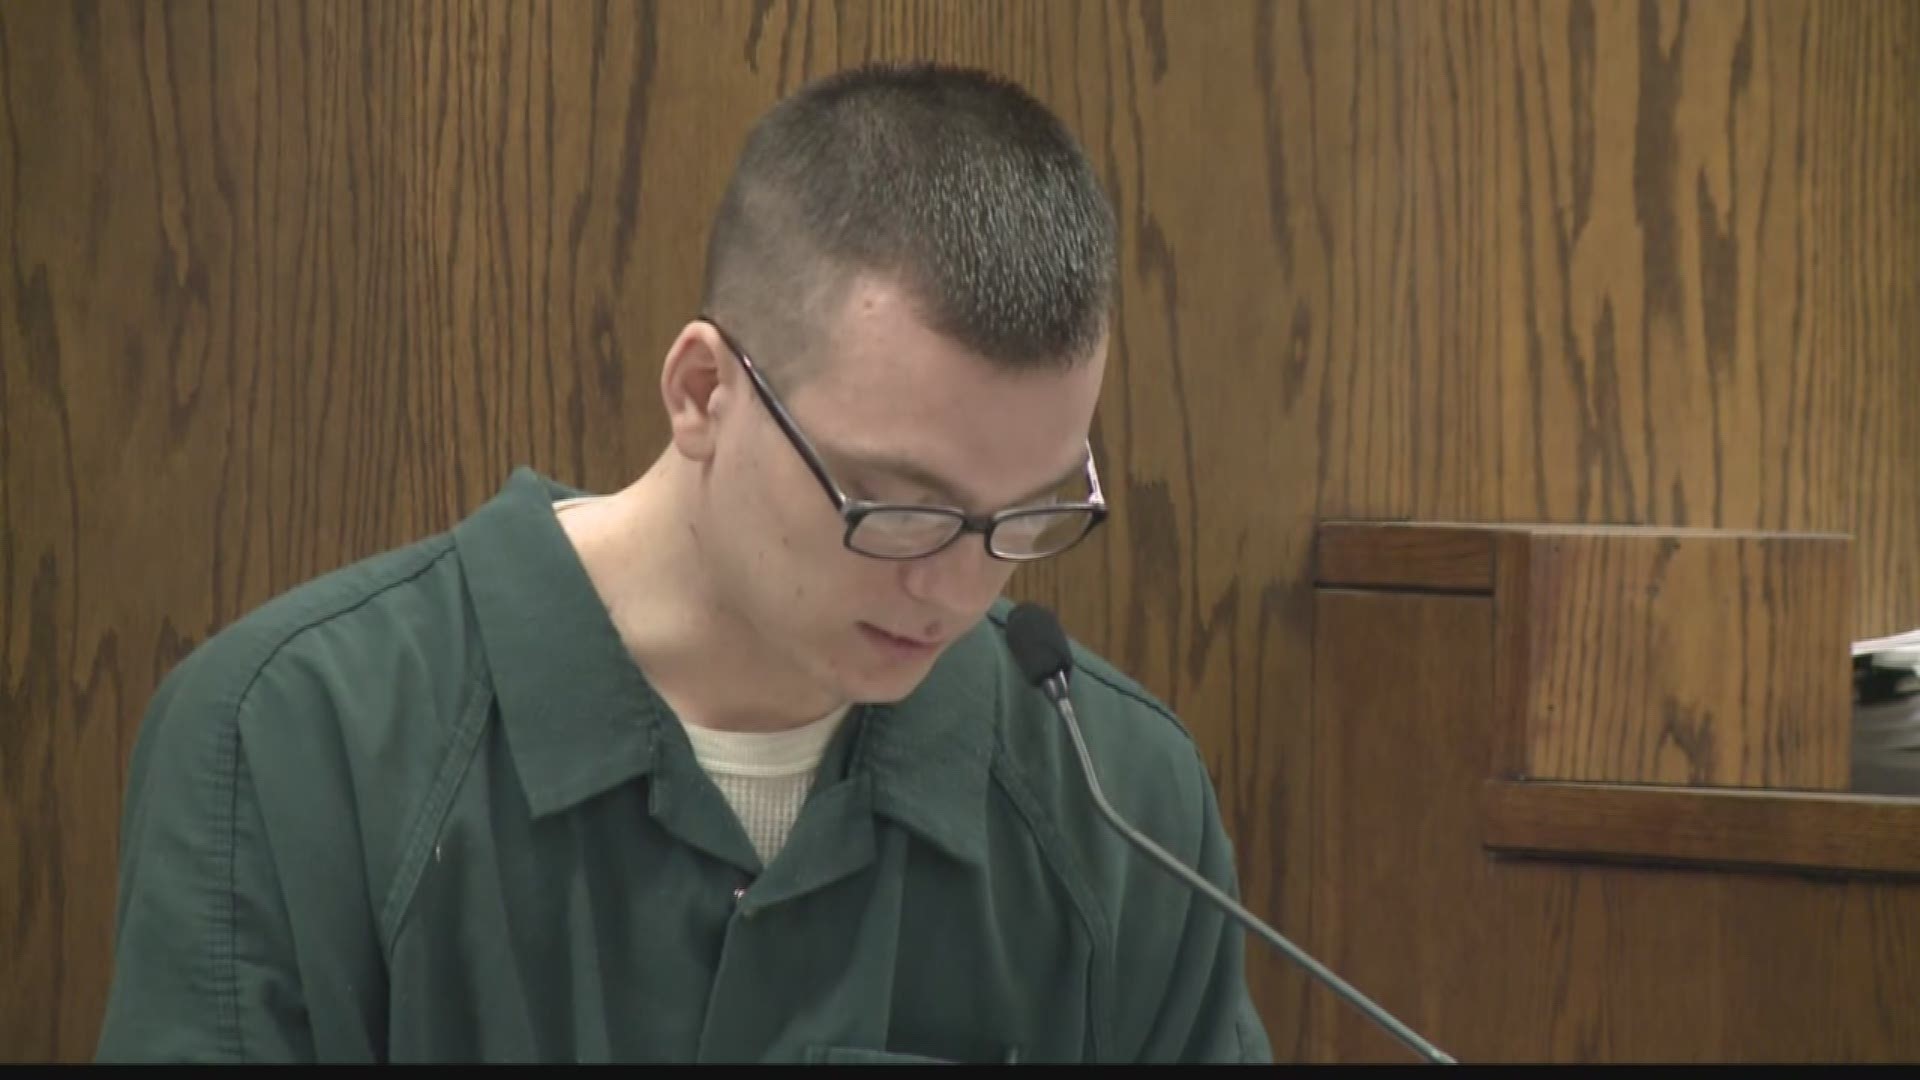 5-12-17: KREM 2's Taylor Viydo was in court Friday to hear the sentencing phase for a Grant Co. man convicted of killing his landlord back in 2014.